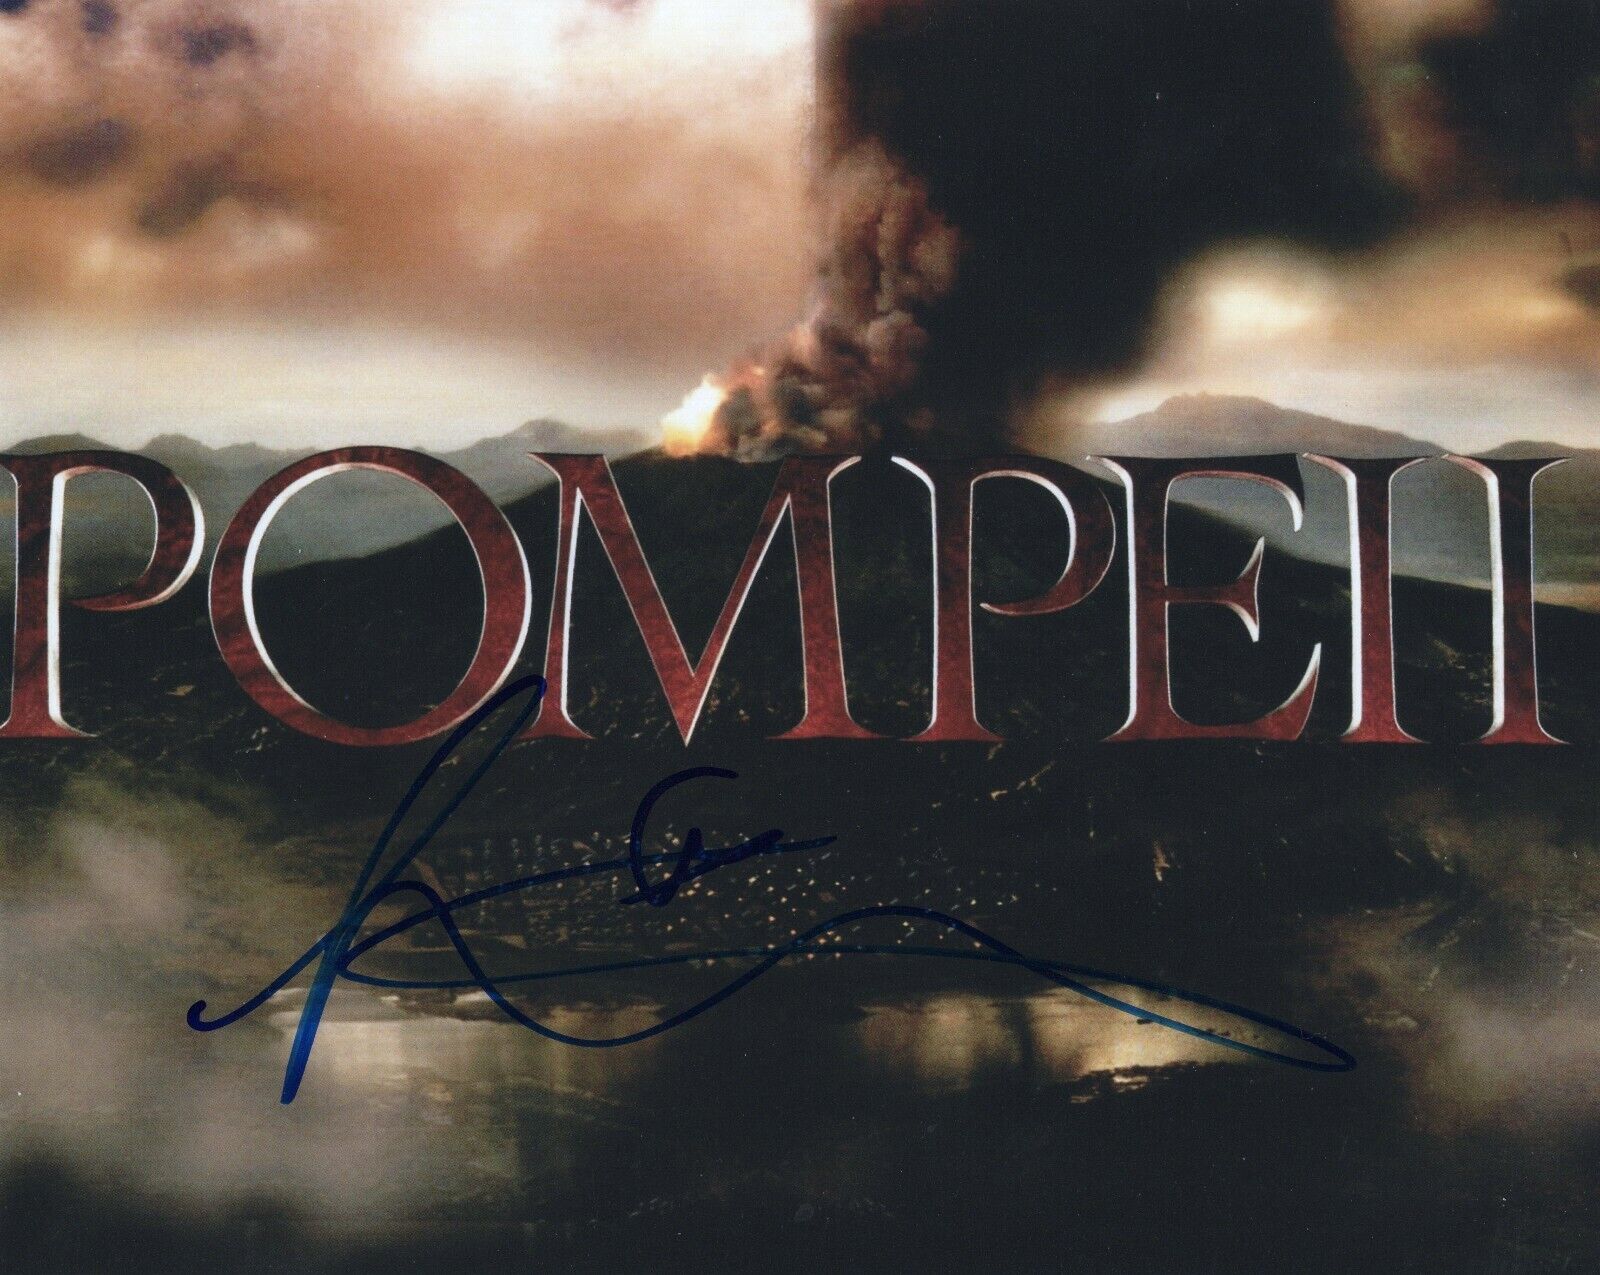 Emily Browning Sucker Punch Sleeping Beauty Pompeii Signed 8x10 Photo Poster painting w/COA #2